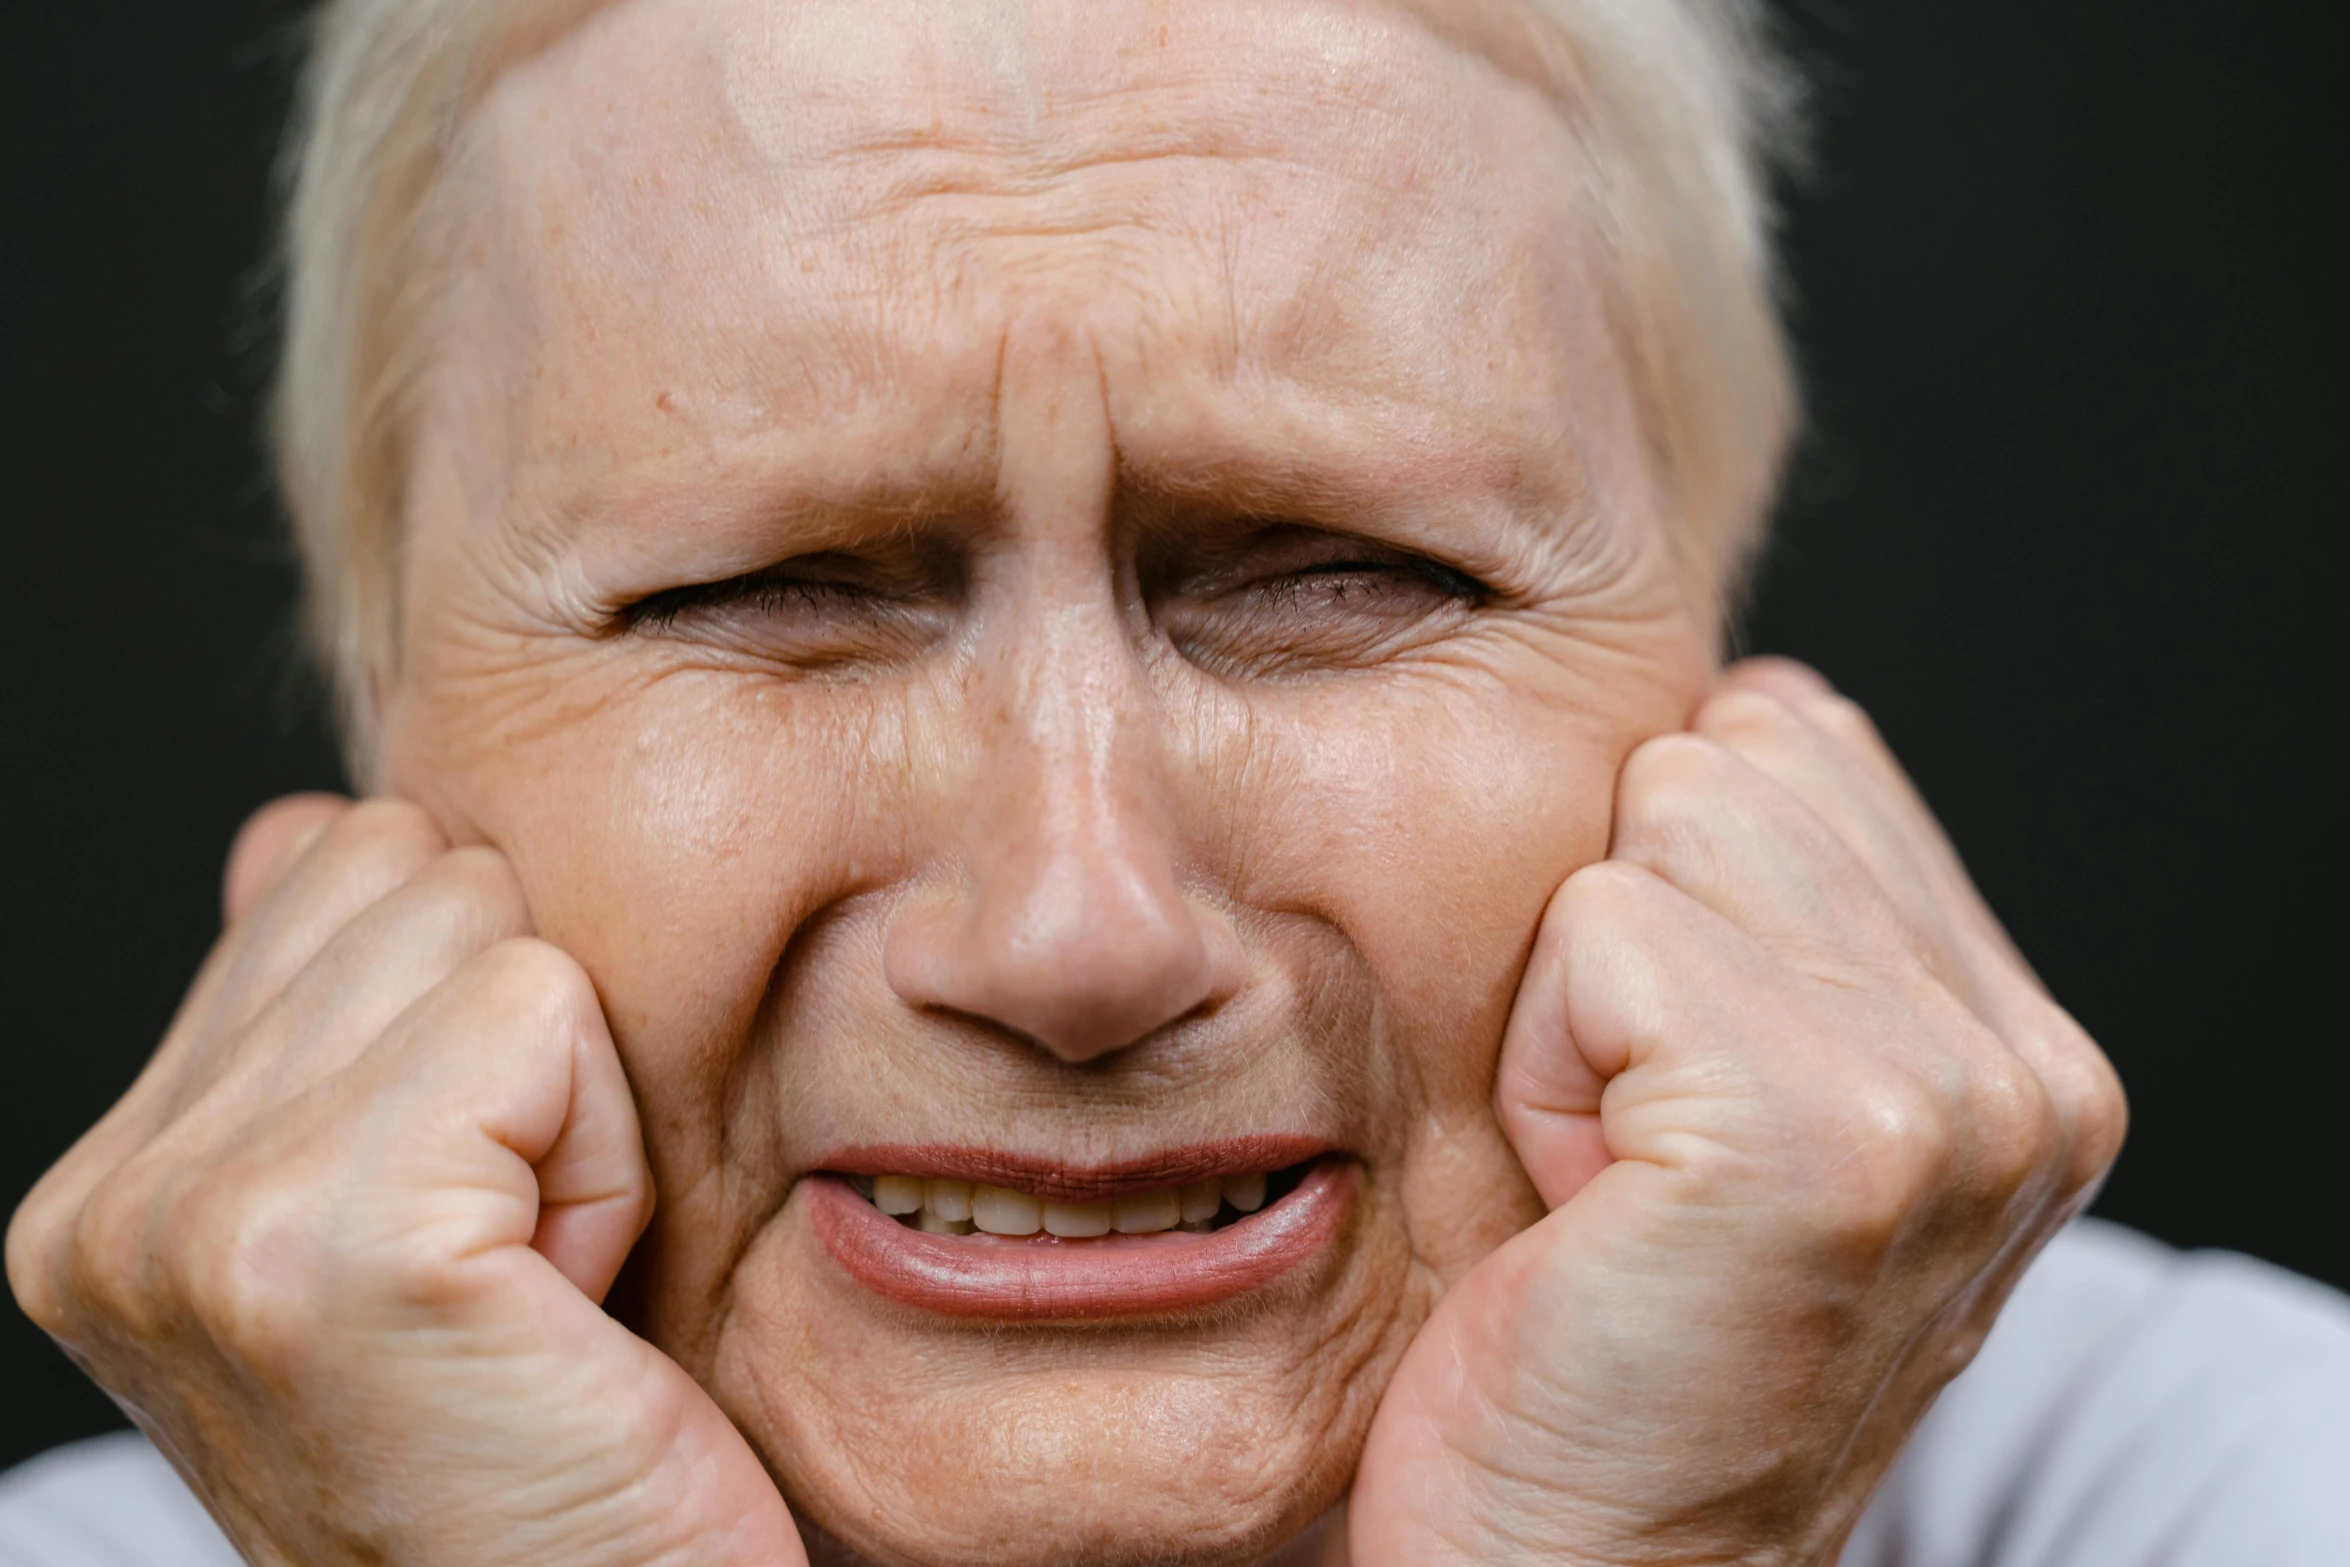 a close up of a person holding their hands to their face, grimacing, wrinkles, uploaded, freezing